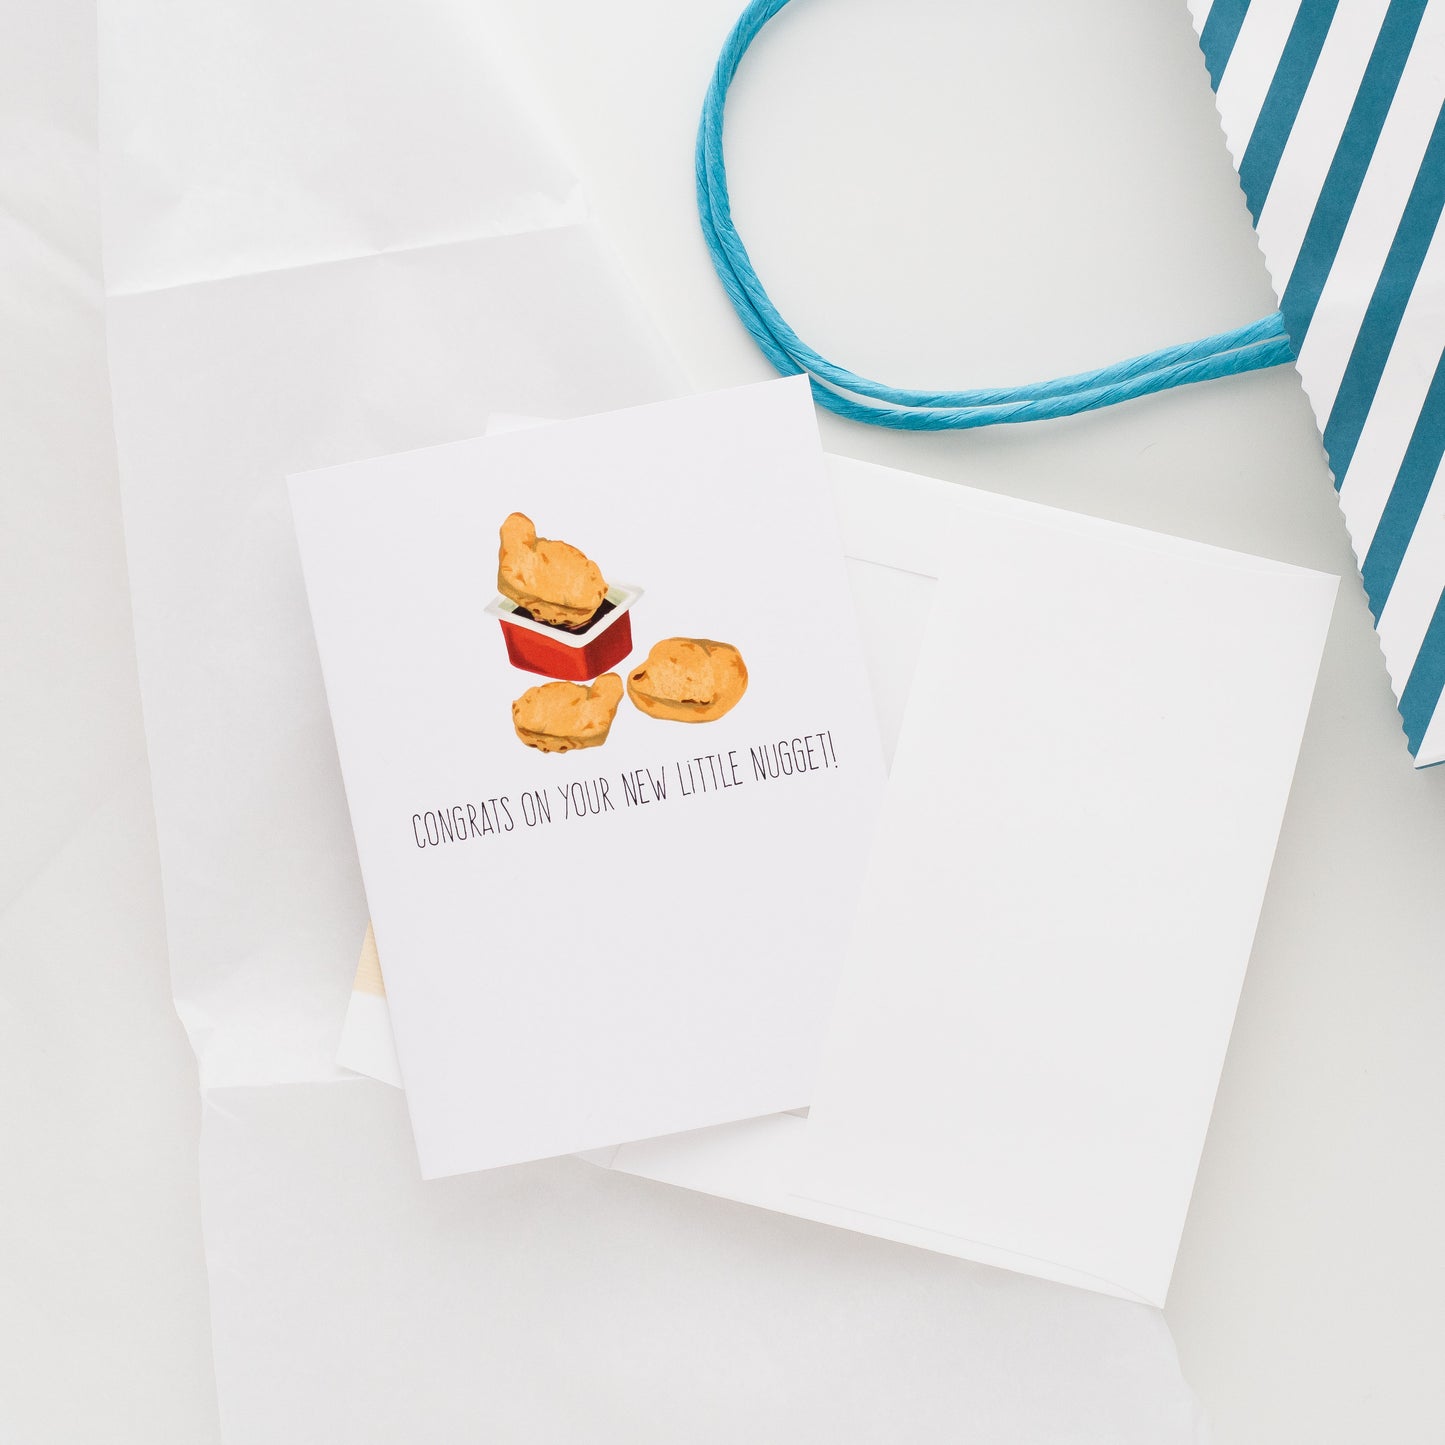 Congrats On Your New Little Nugget! - Greeting Card